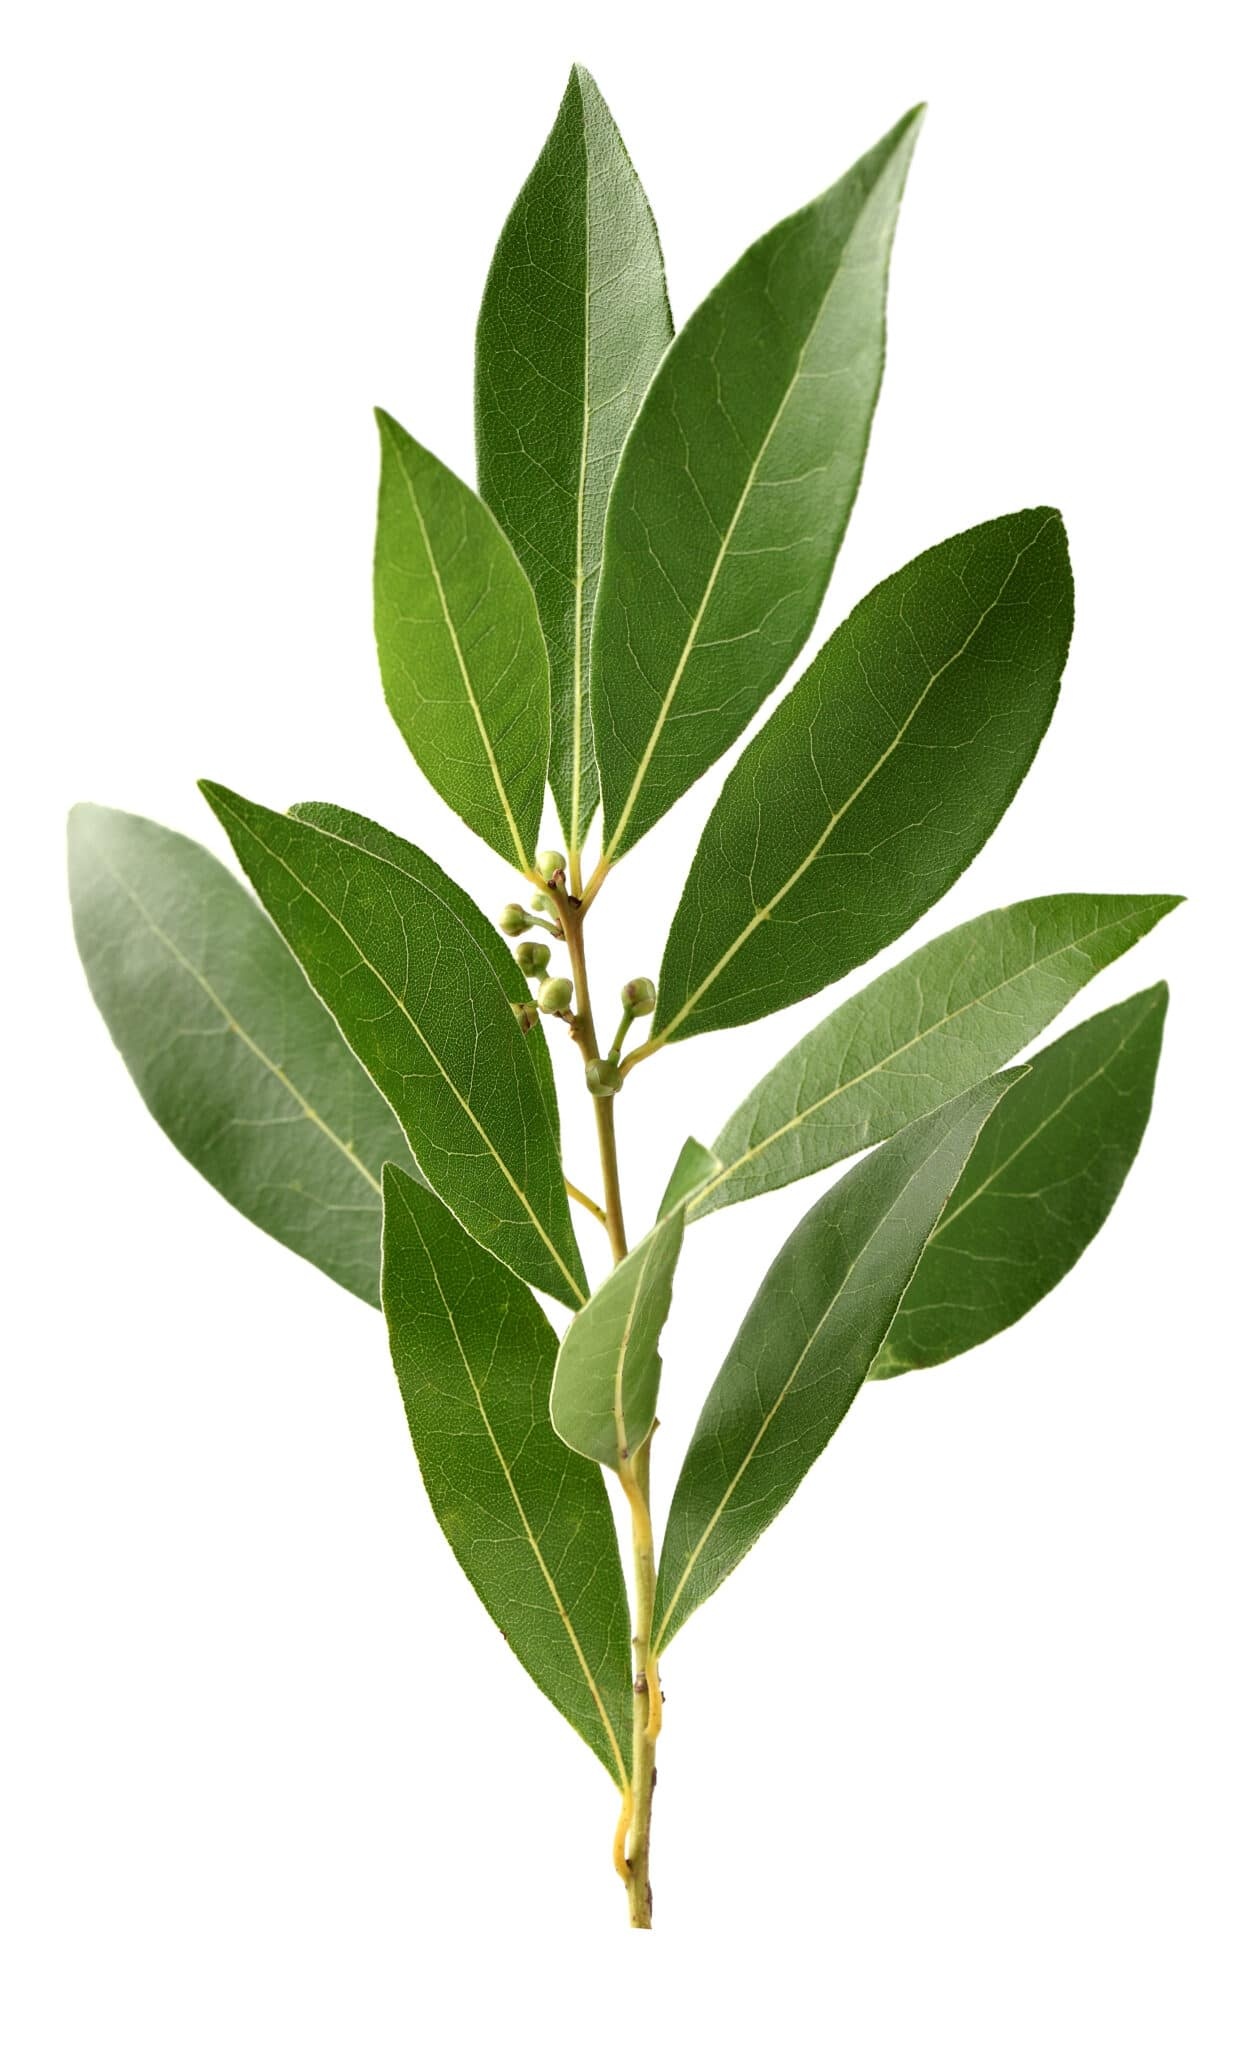 HD wallpaper, Harvesting, Plant Growth, Bay Leaves, Phone Hd Bay Leaves Background Image, Usage, 1260X2050 Hd Phone